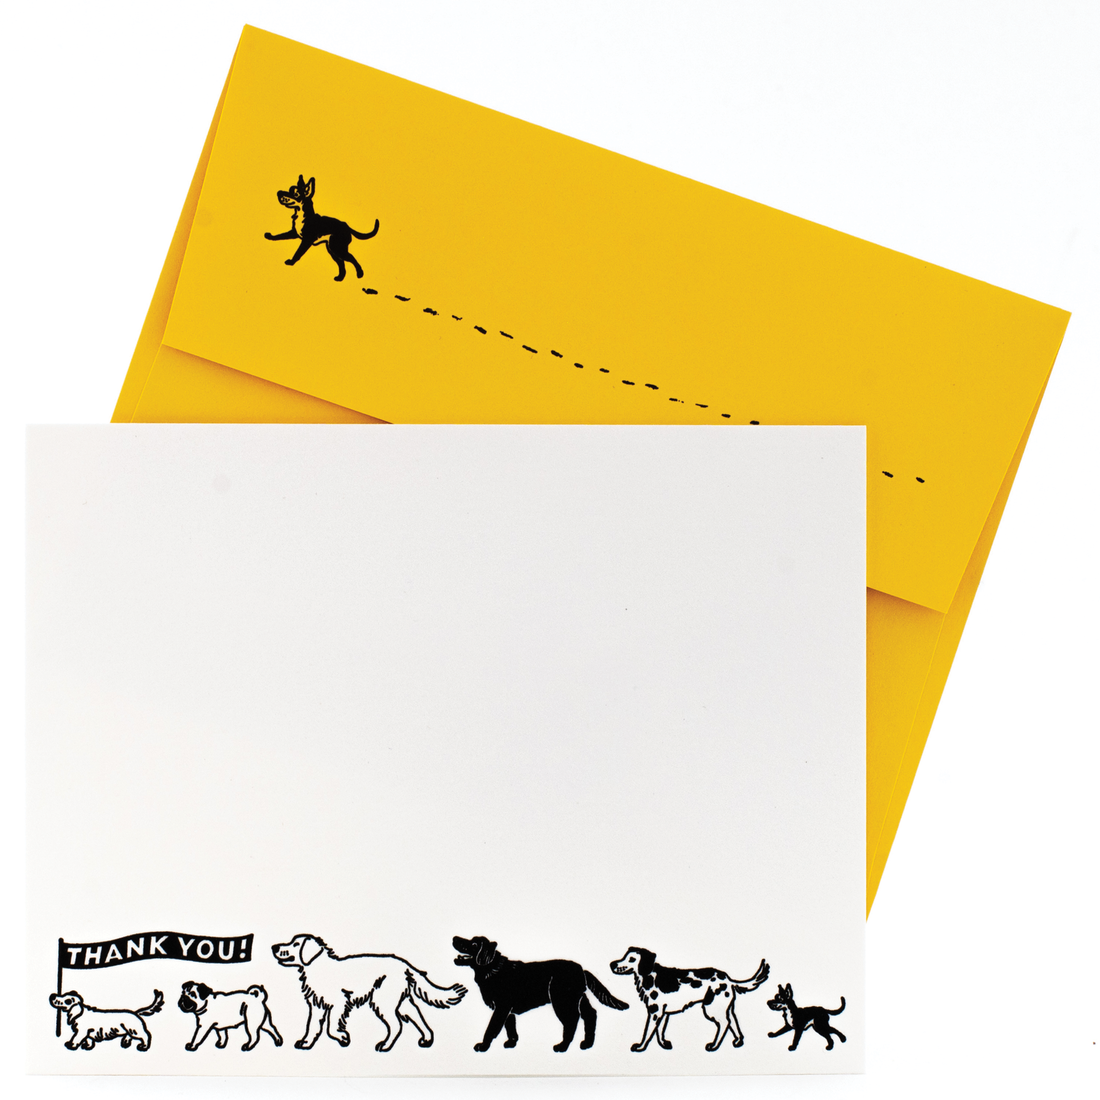 Image of card with white background with line of dogs in black and white with first dog holding a black banner with white text says, “Thank you”. Yellow envelope with image of black dog on back flap. 